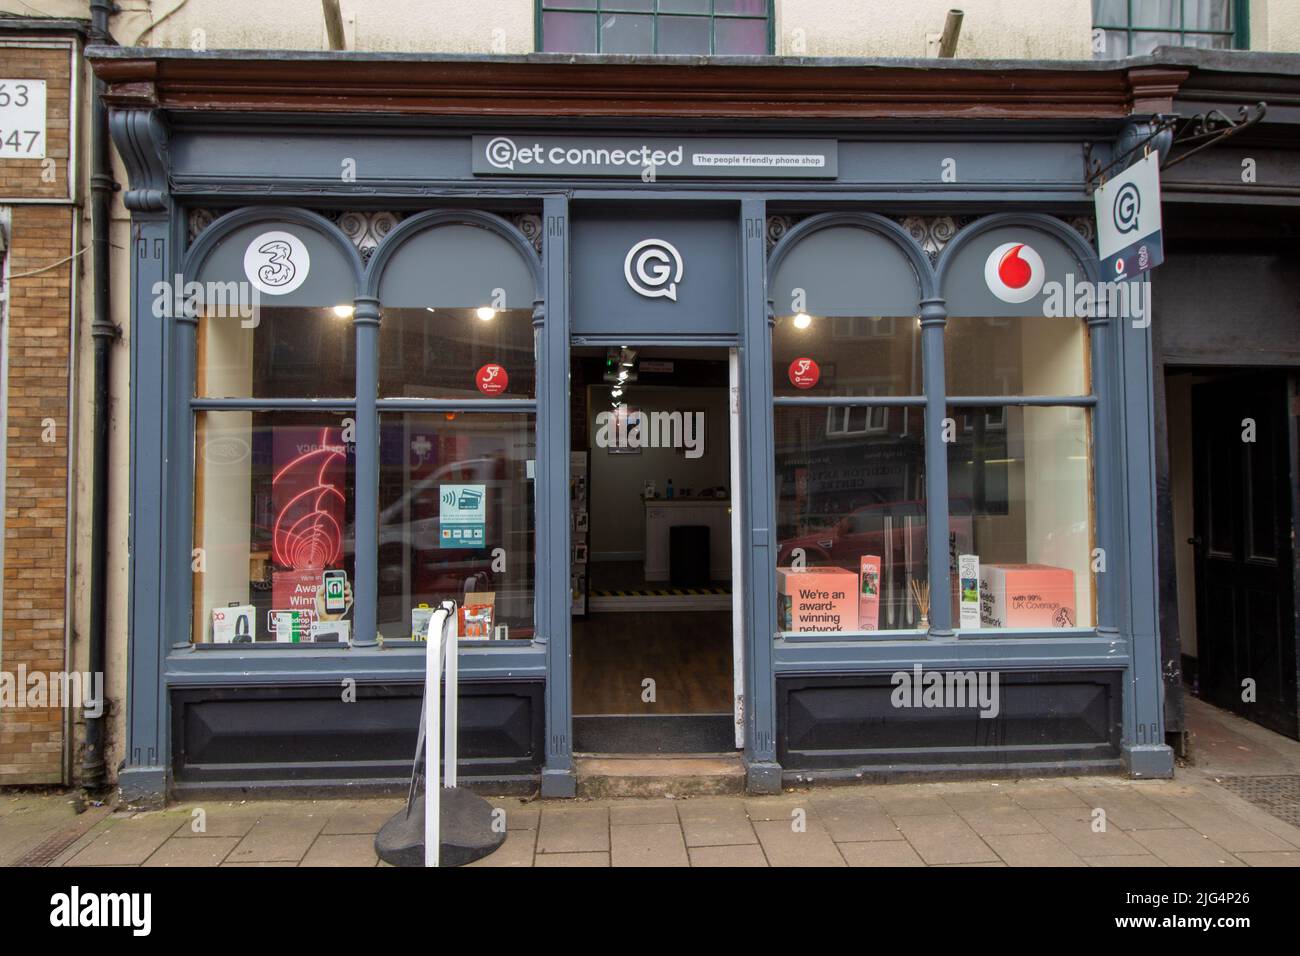 CREDITON, DEVON, UK - 6. APRIL 2022 Get connected phone Shop on the High Street Stockfoto